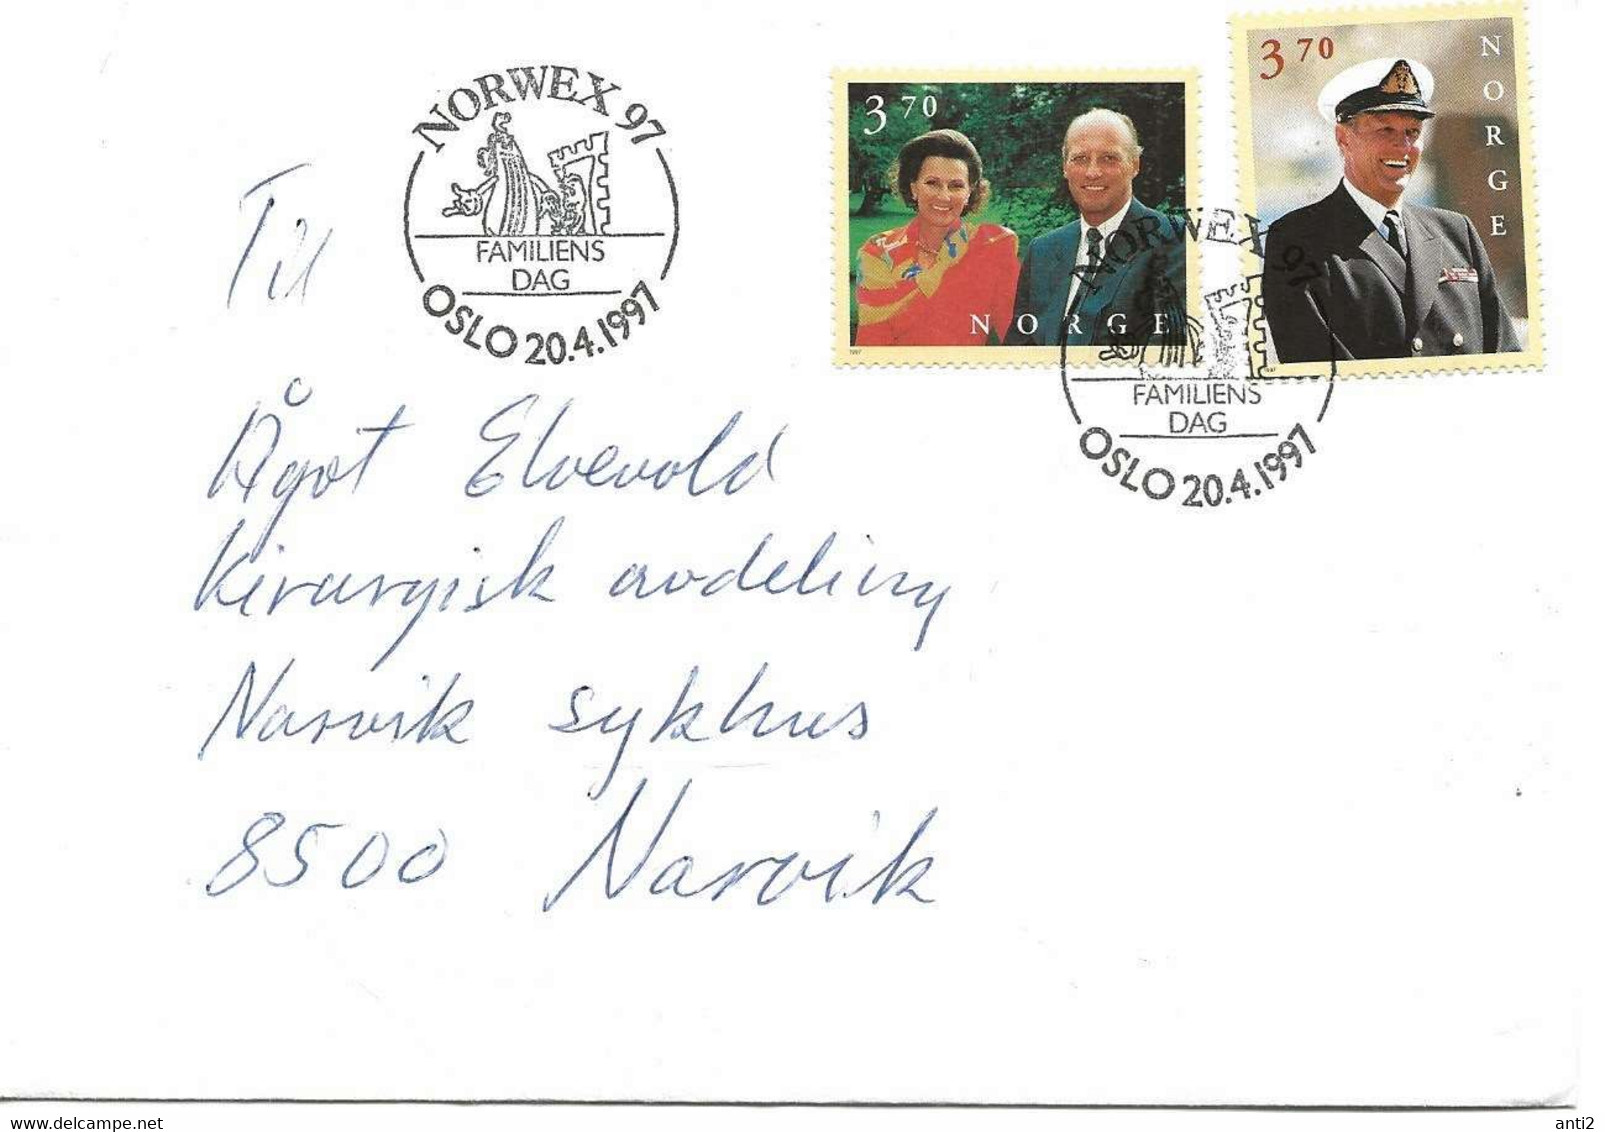 Norway 1997  Cover With Cancelled Norwex 97 - Familys Day, Mi 1244-1245 King And Queen  20.4.97 - Briefe U. Dokumente